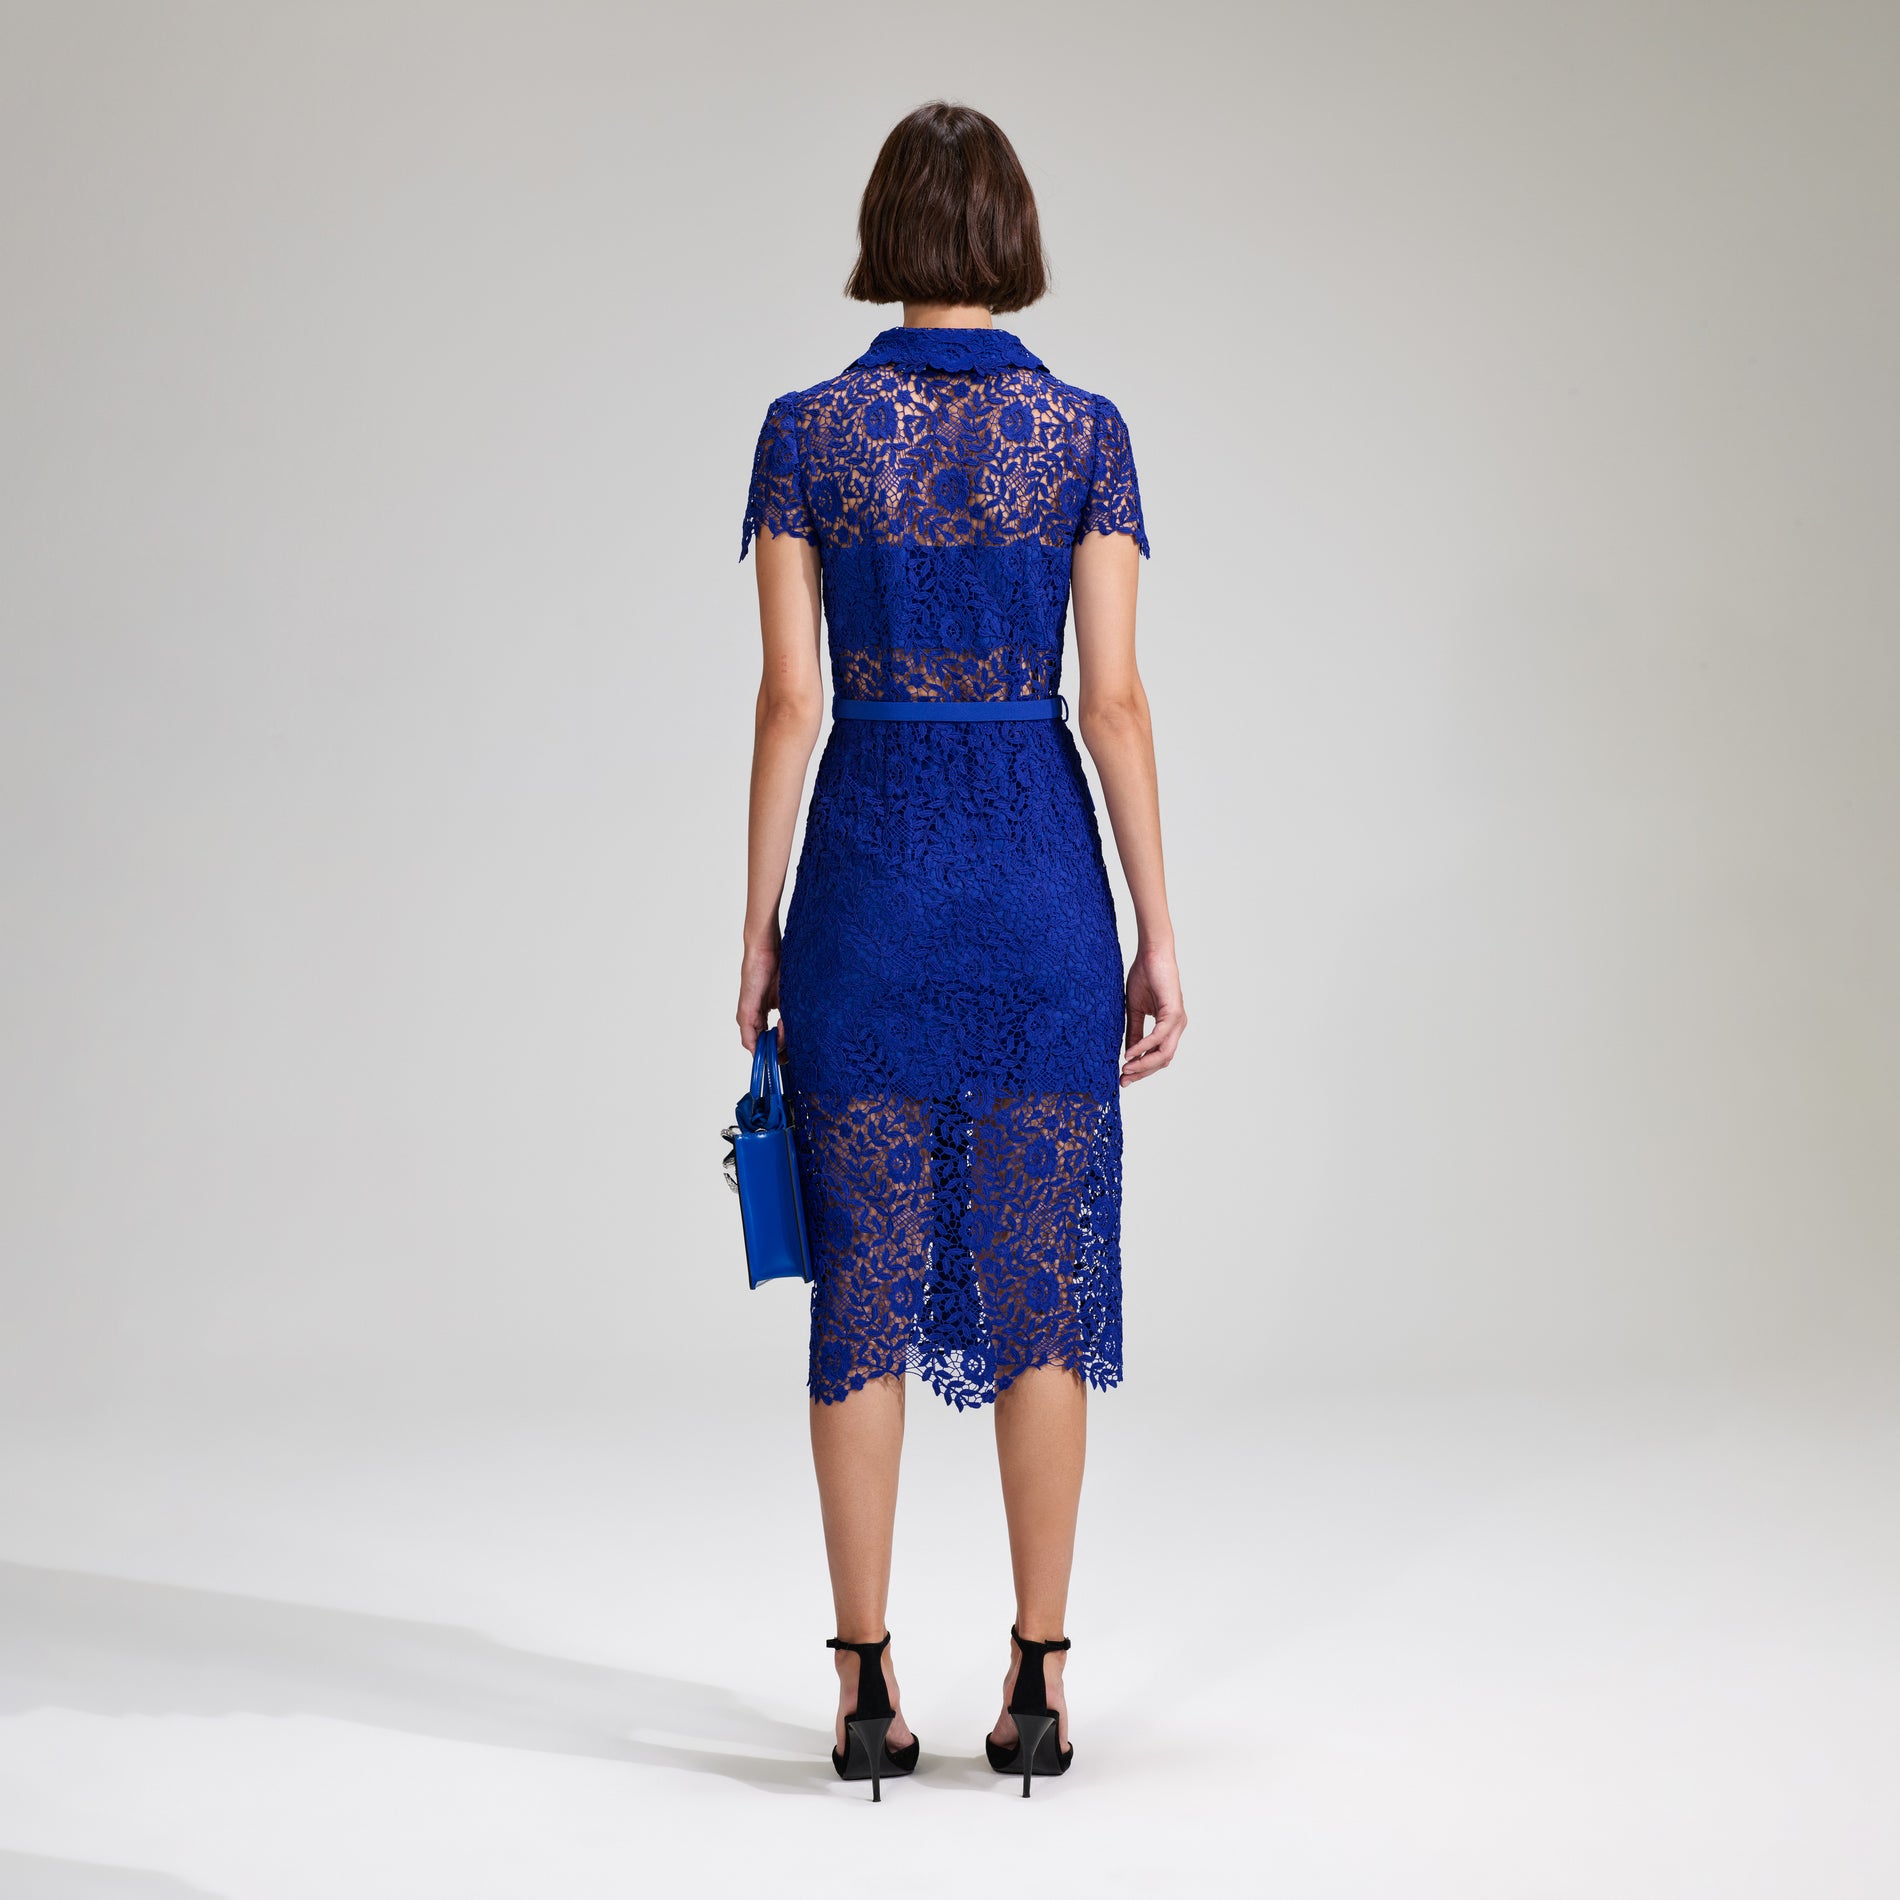 A woman wearing the Cobalt Rose Lace Button Midi Dress